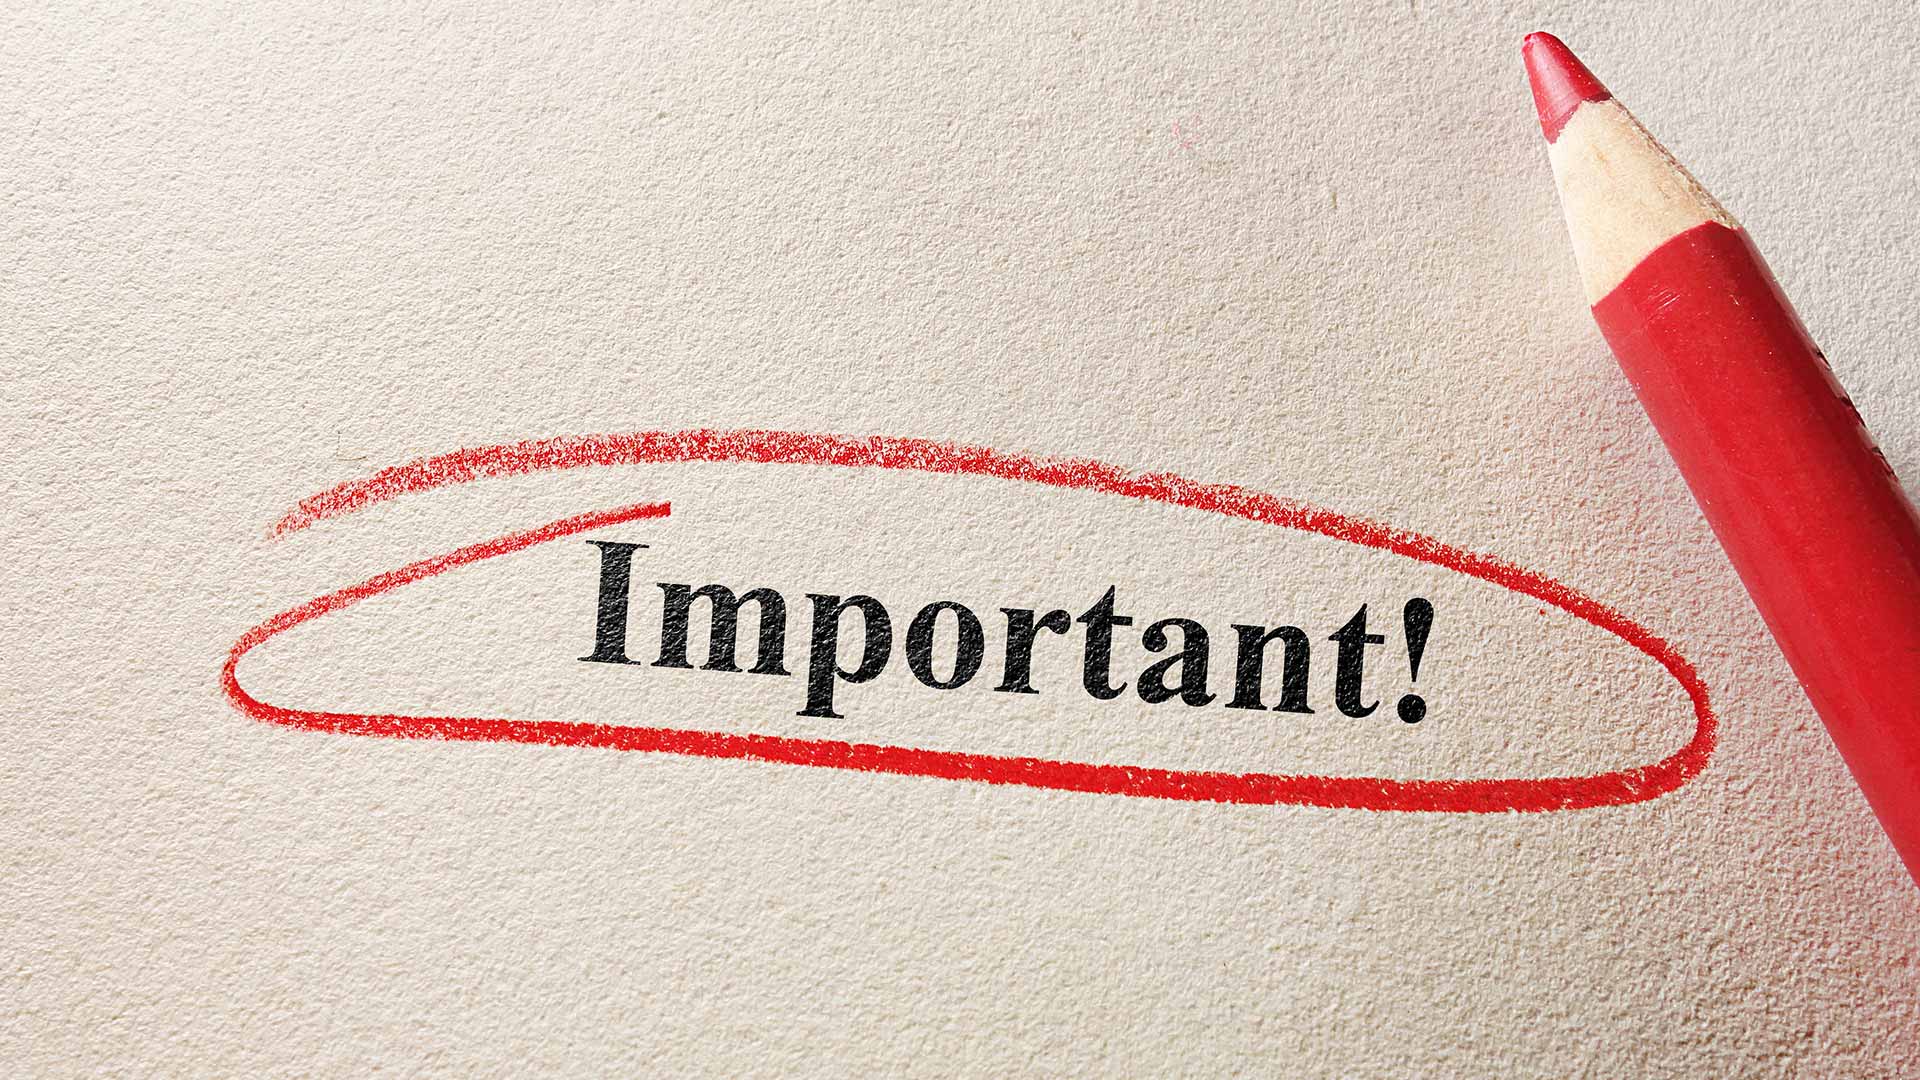 The word 'Important' circled in red pencil on a white piece of paper